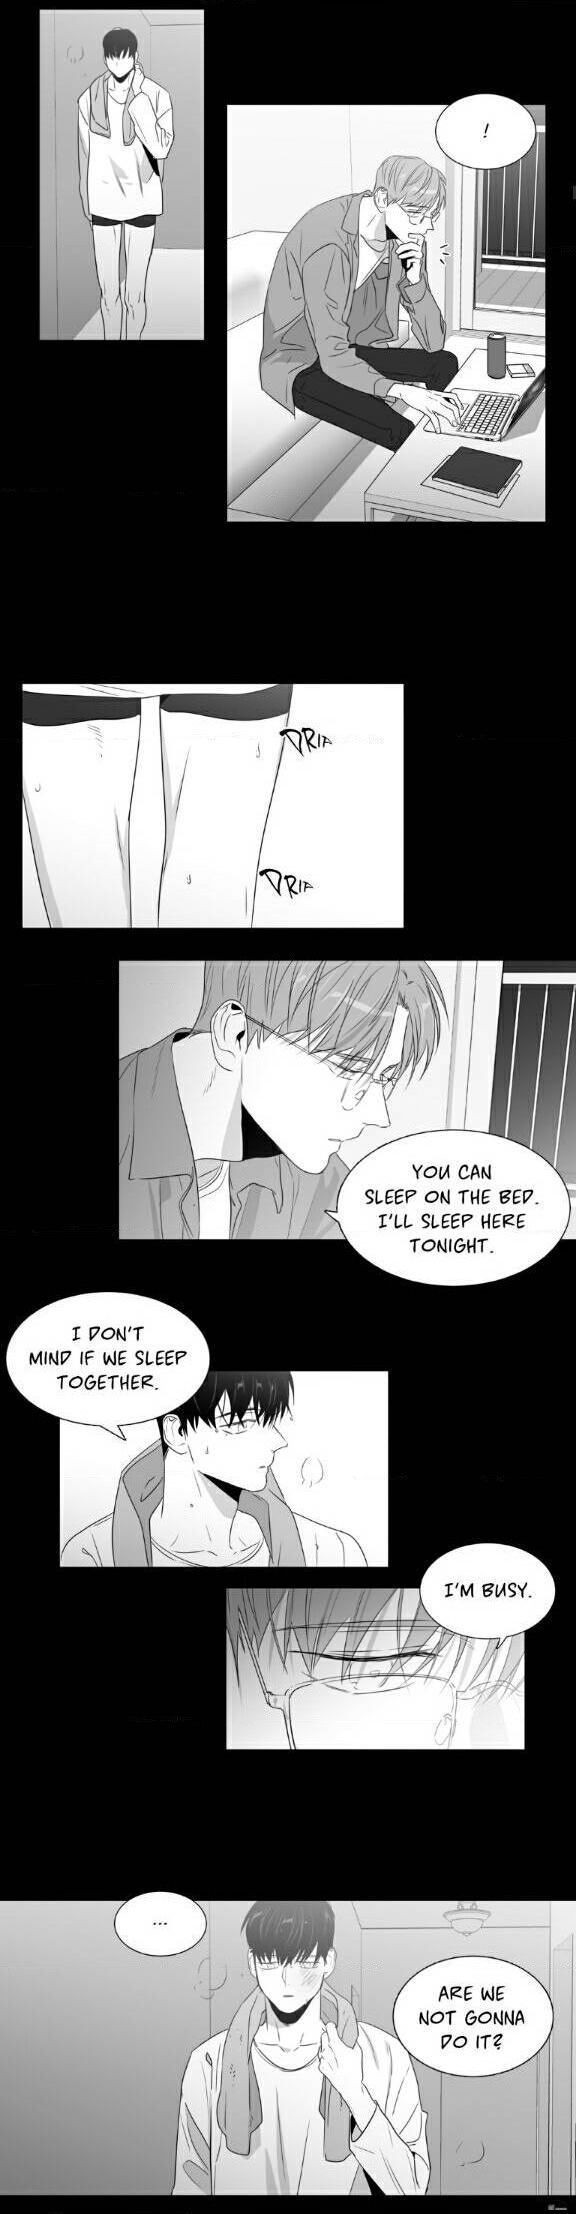 Lover Boy (Lezhin) Chapter 048.4 page 7